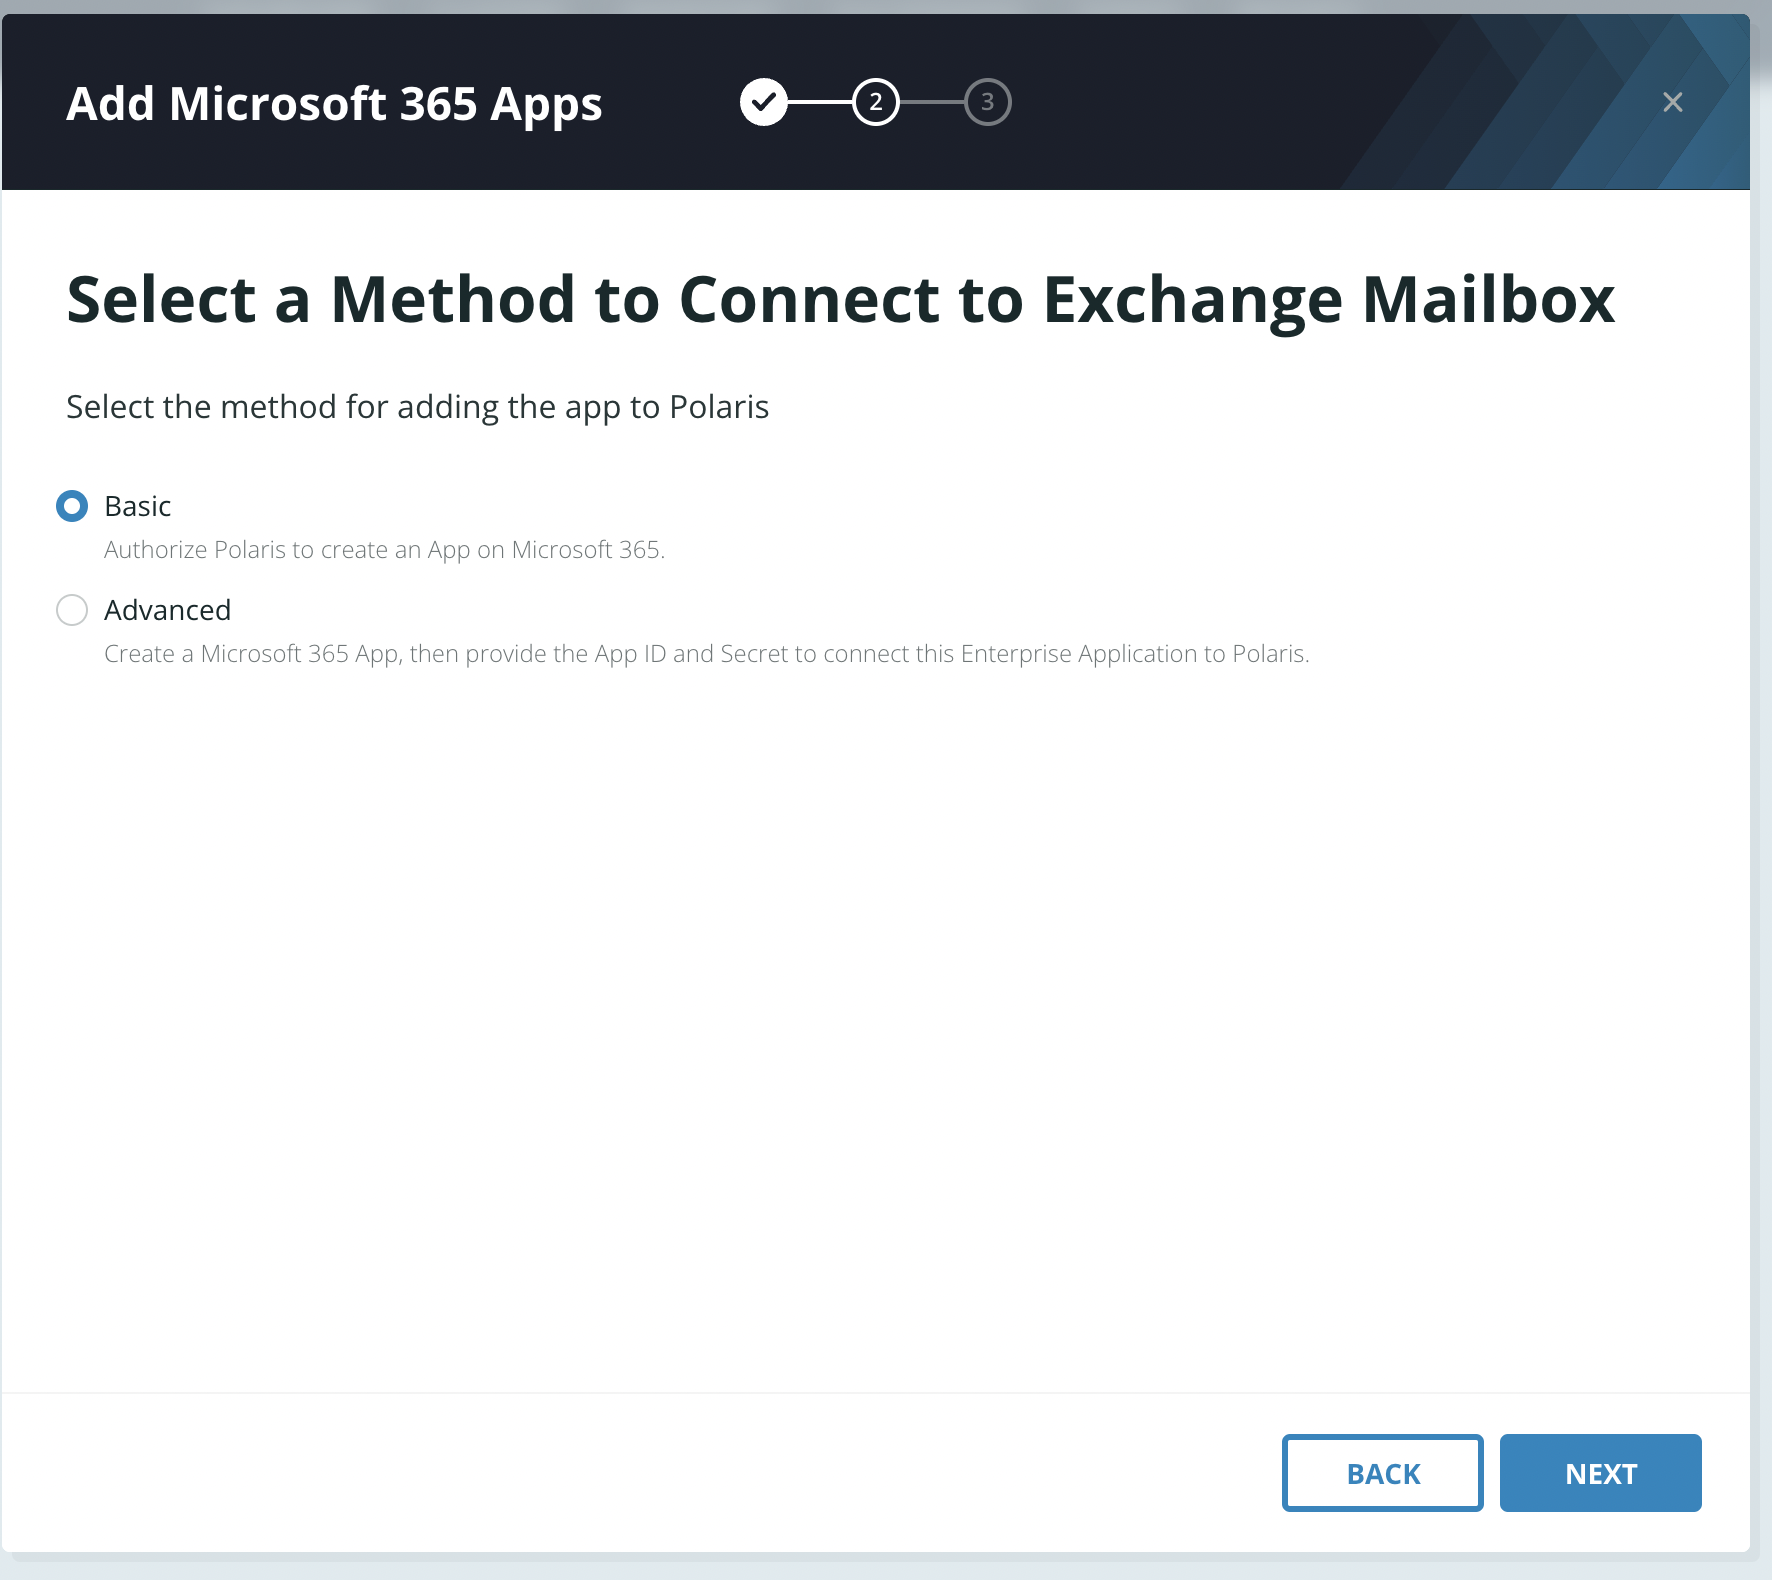 Select a method to connect